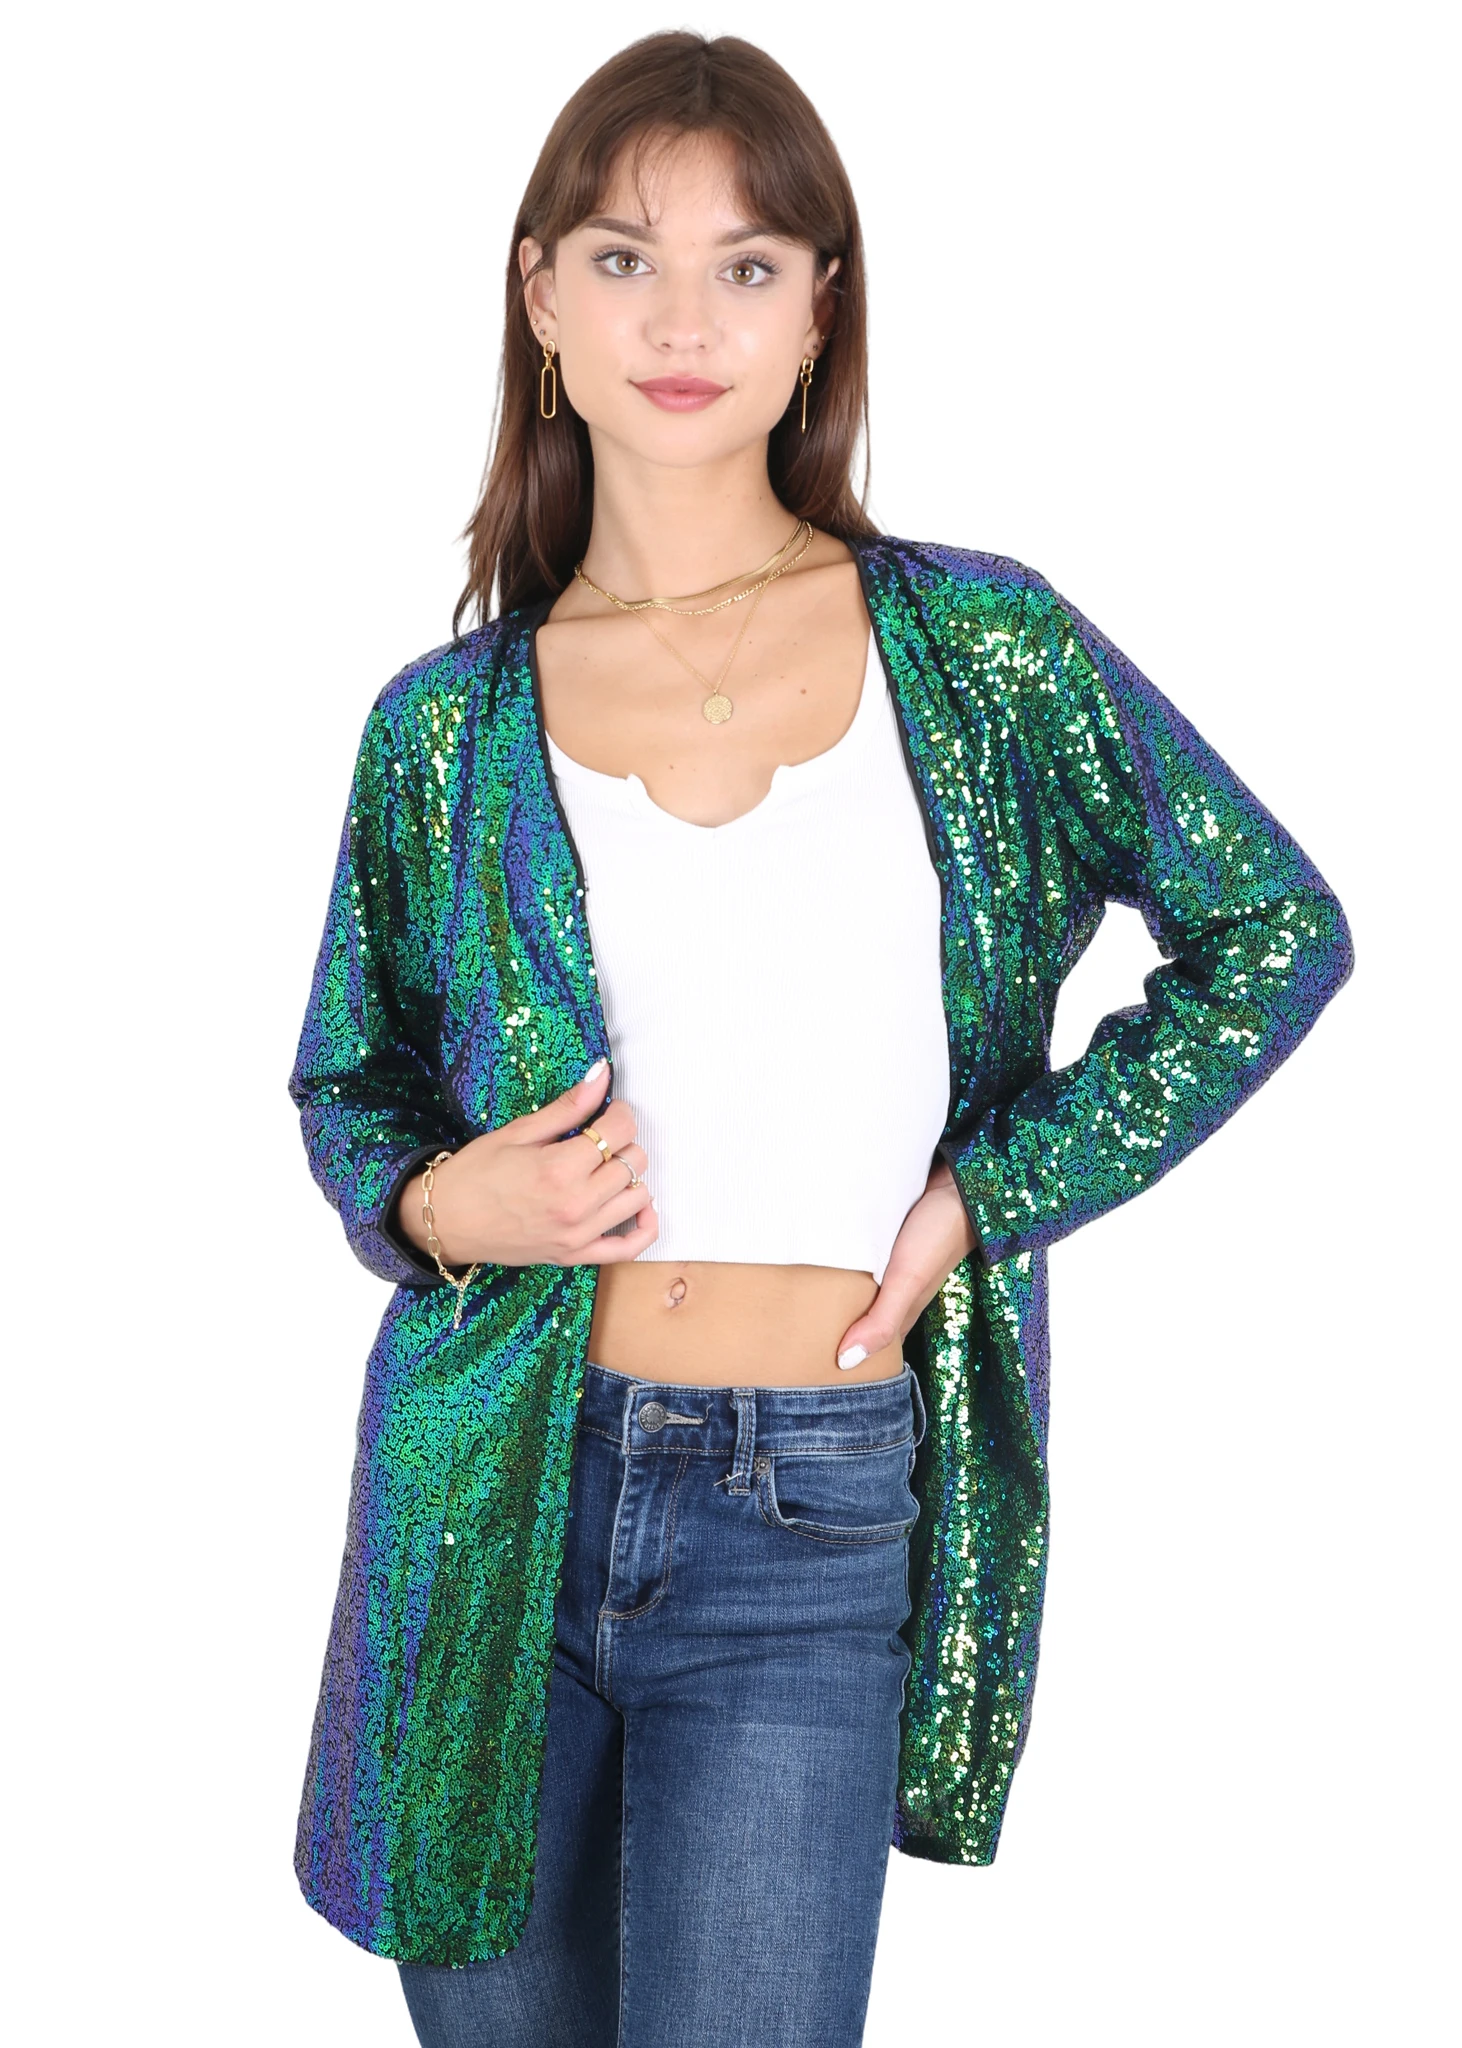 Women's Open Front Sequin Coat Las Vegas Blazer Party Club Cocktail Jacket Outerwear Sparkly Sequined Cardigan Jacket bodycon dress women s sexy date night going out cowl neck spaghetti strap backless high slit solid color sheath midi vegas party dress s light blue